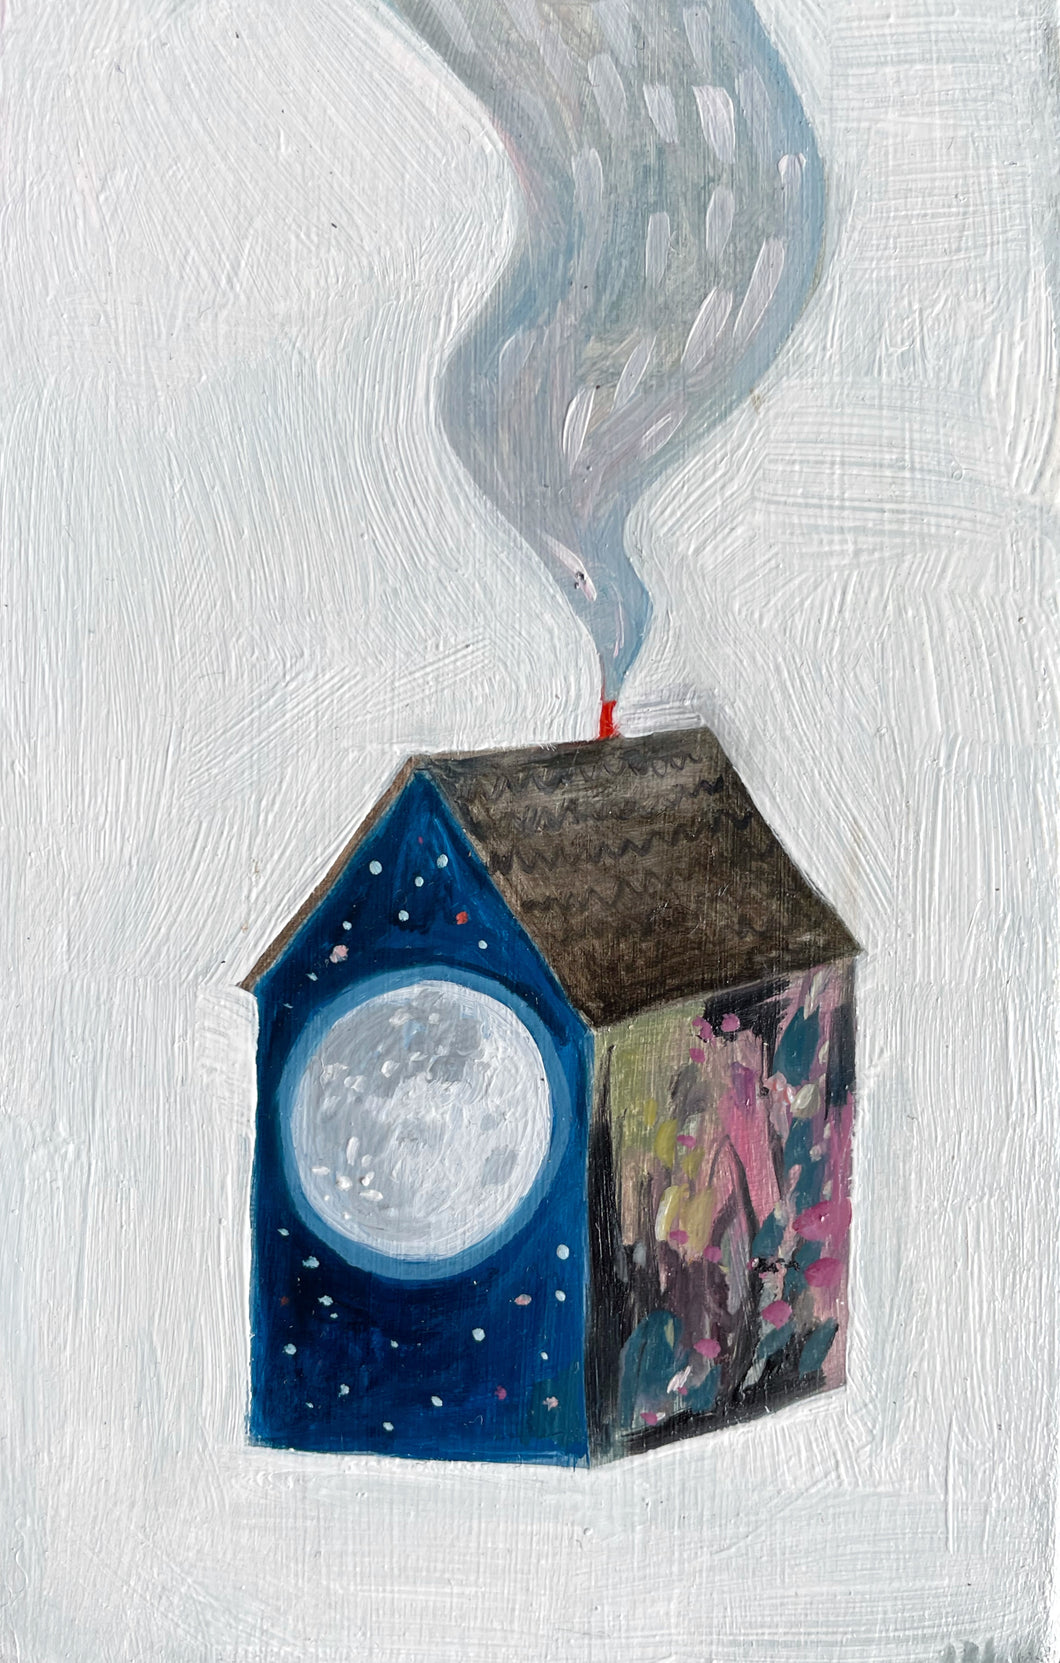 A home made of moonlight and mystery